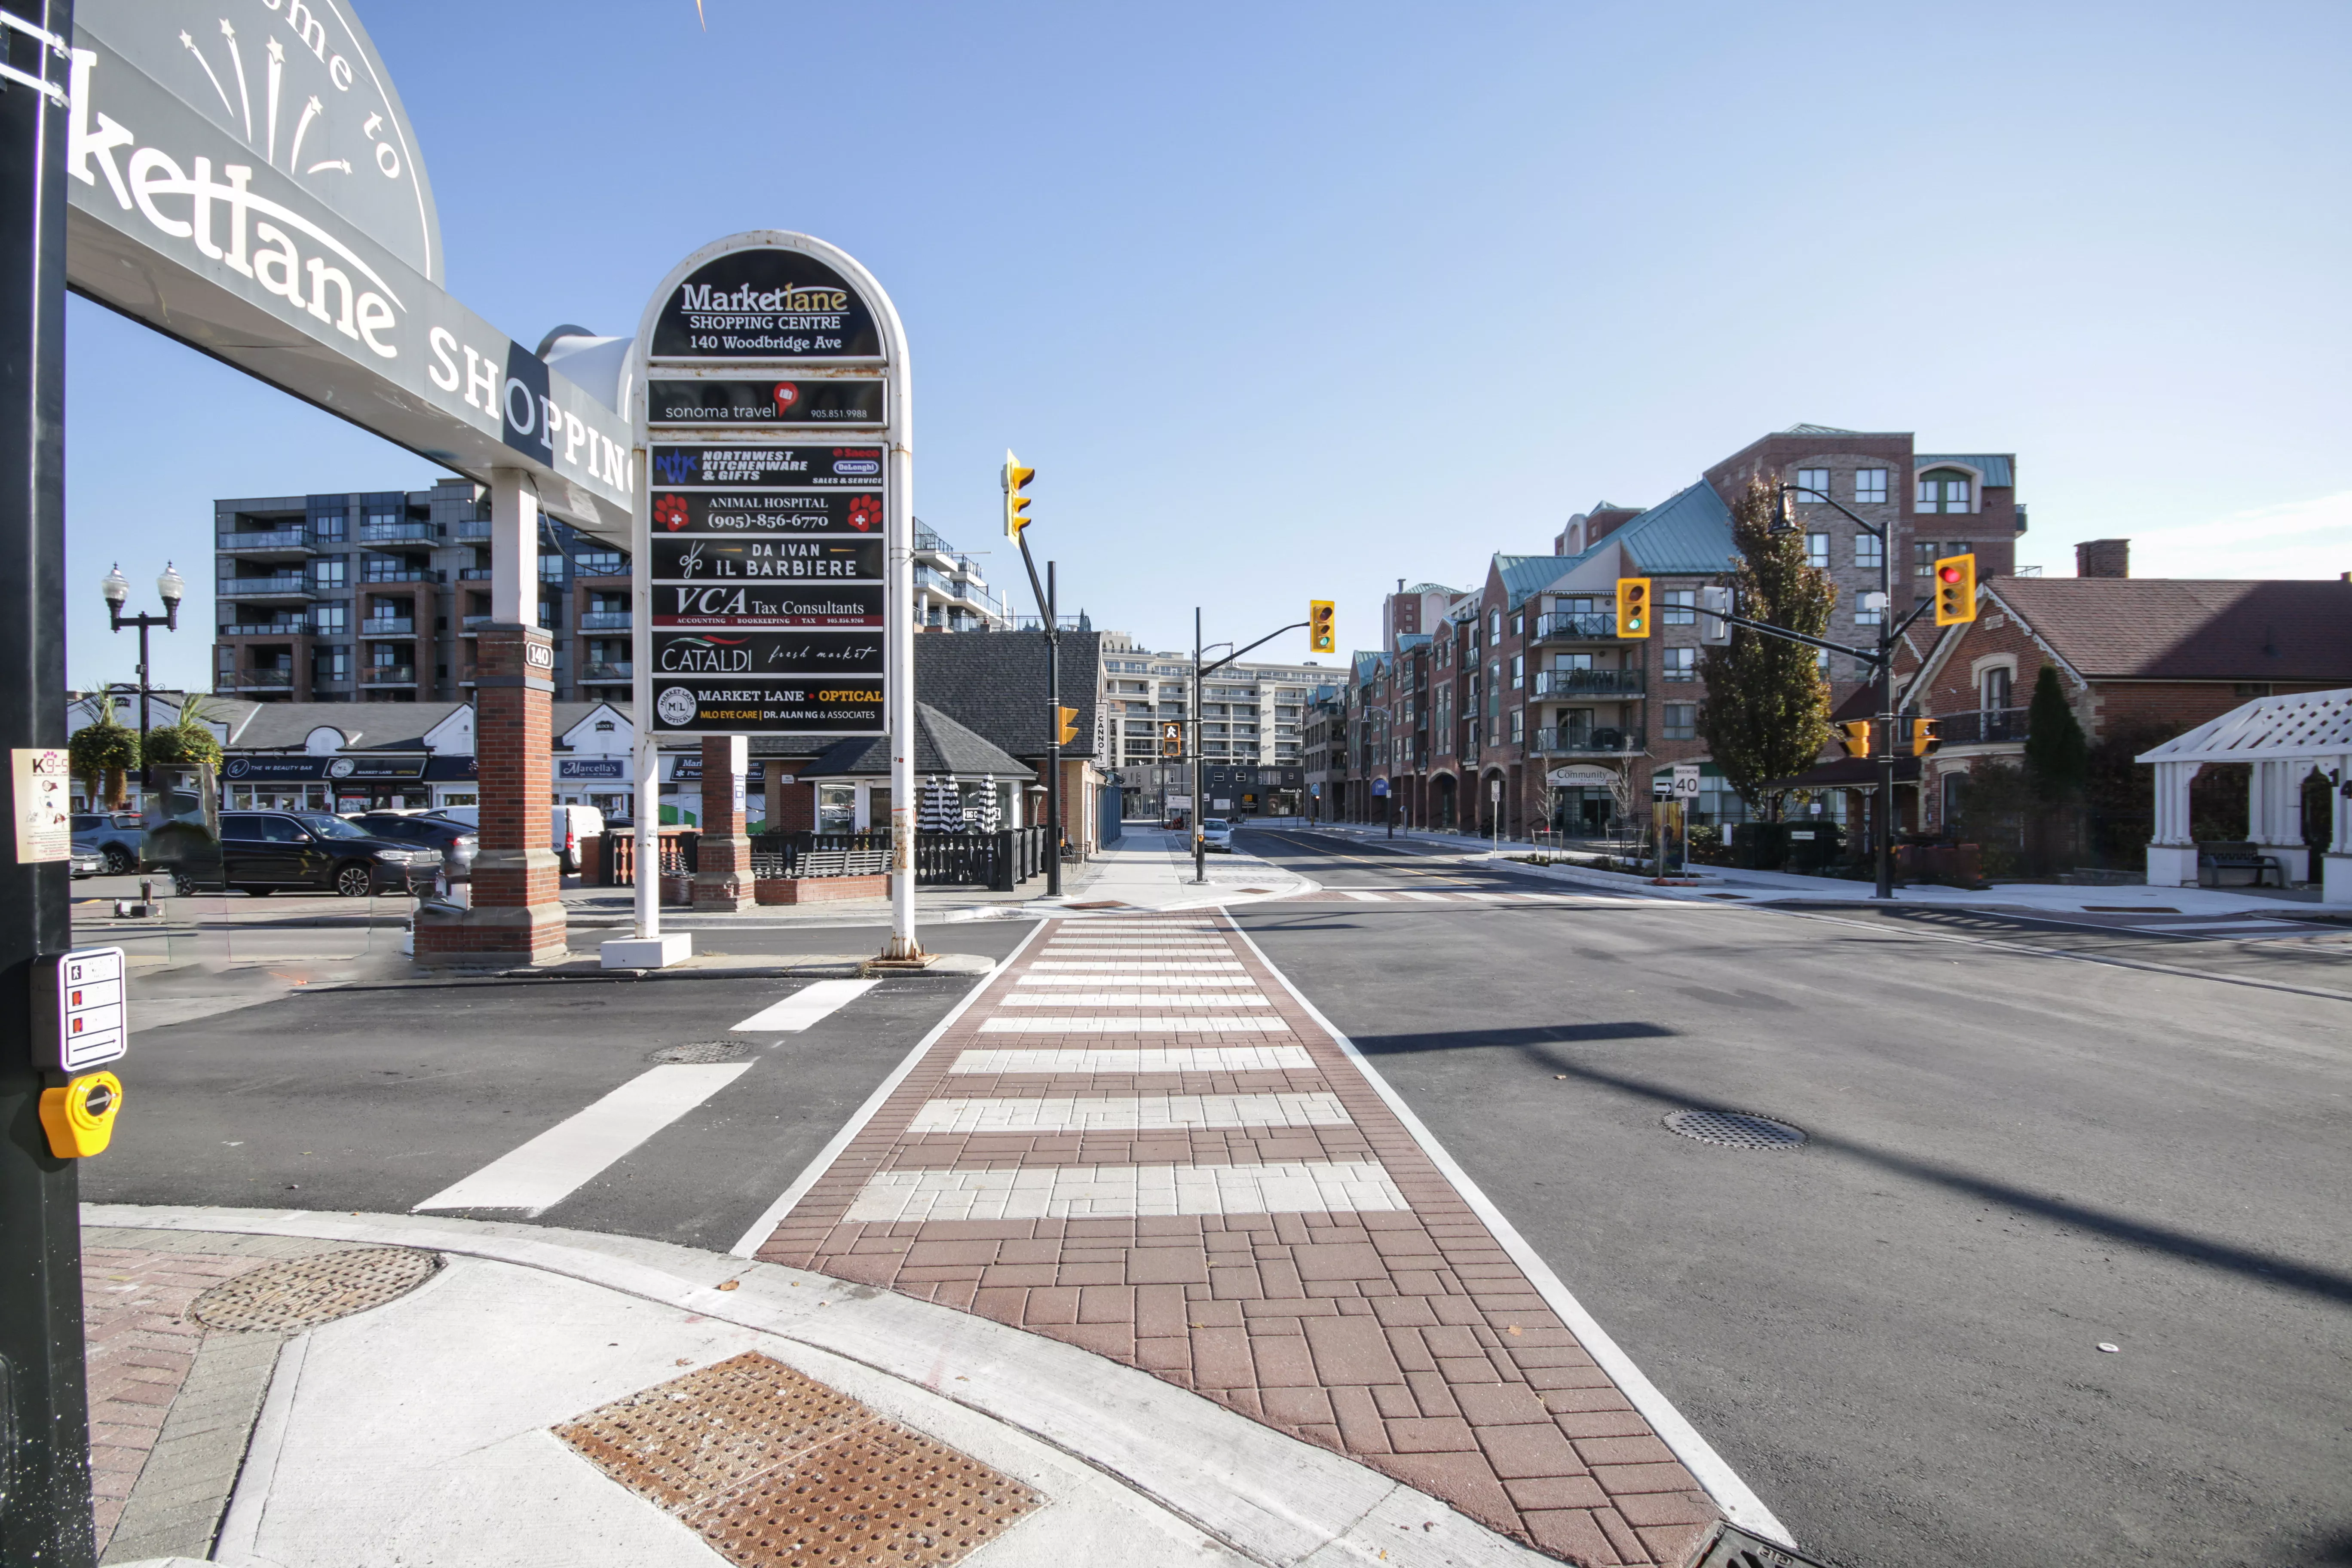 This image shows the entrance to the Marketlane Shopping Centre along Woodbridge Avenue and the enhanced roadway and sidewalk, as part of the Woodbridge Avenue improvements project..